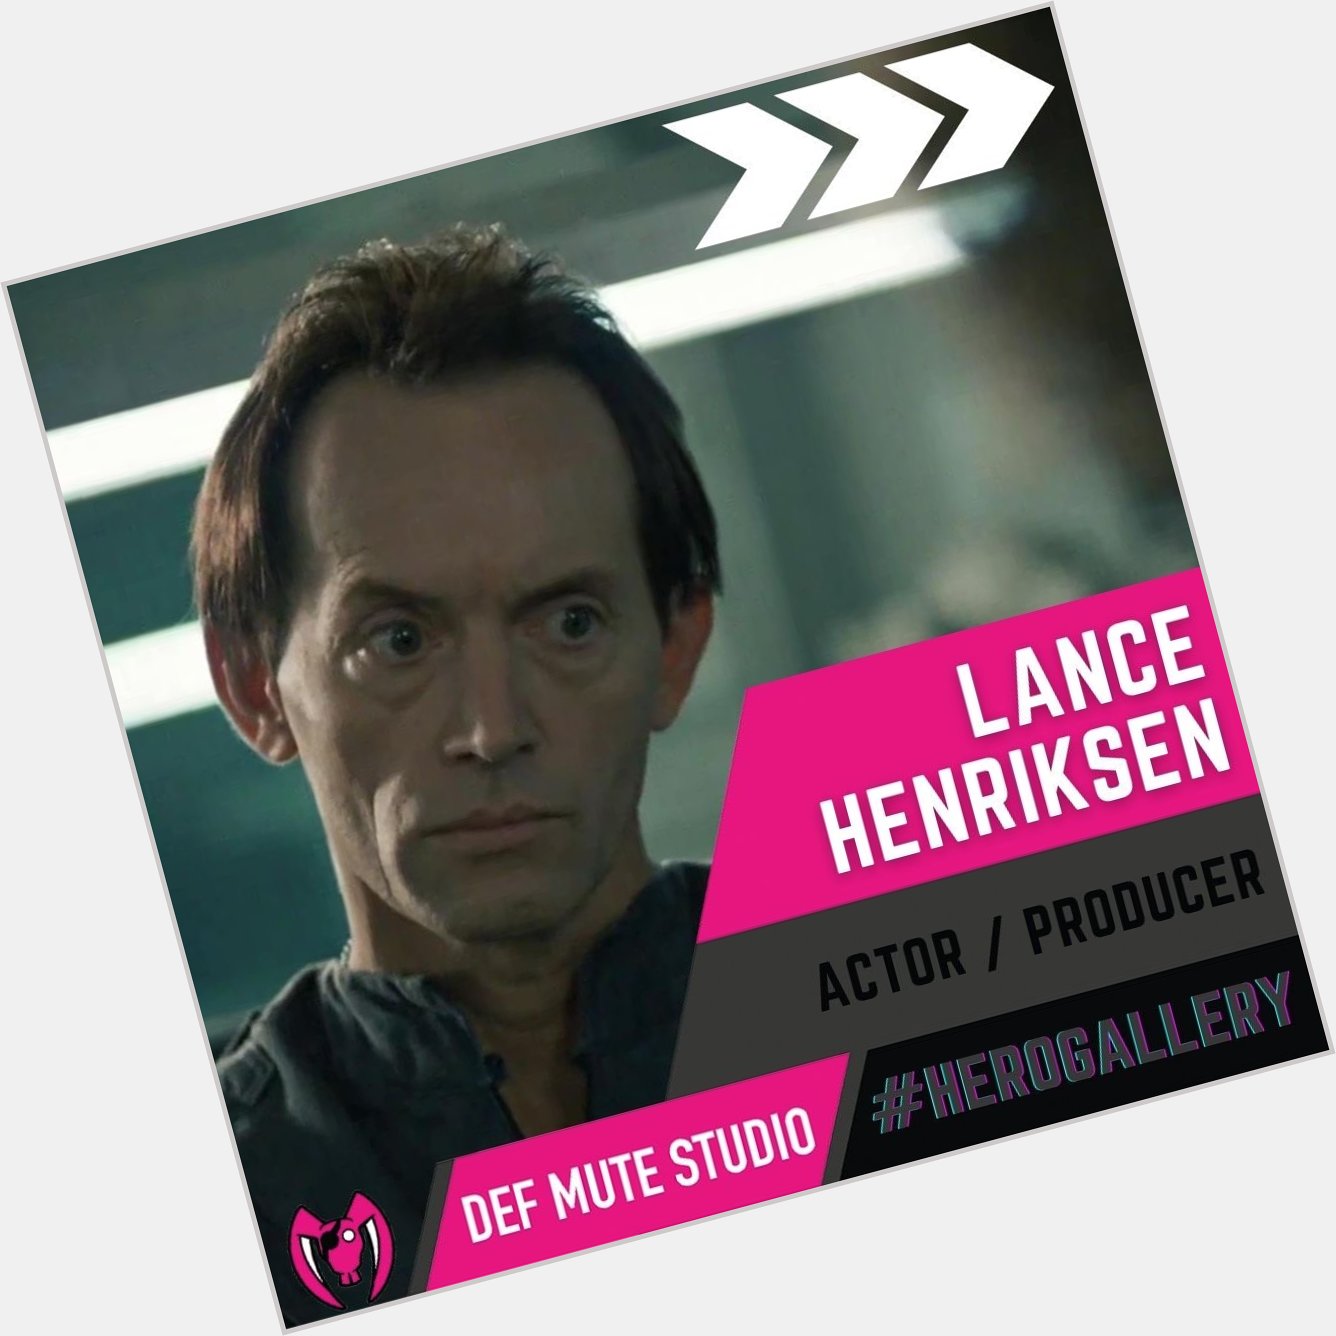 One of the true greats! Happy Birthday to Lance Henriksen, and welcome to the Hero Gallery! 